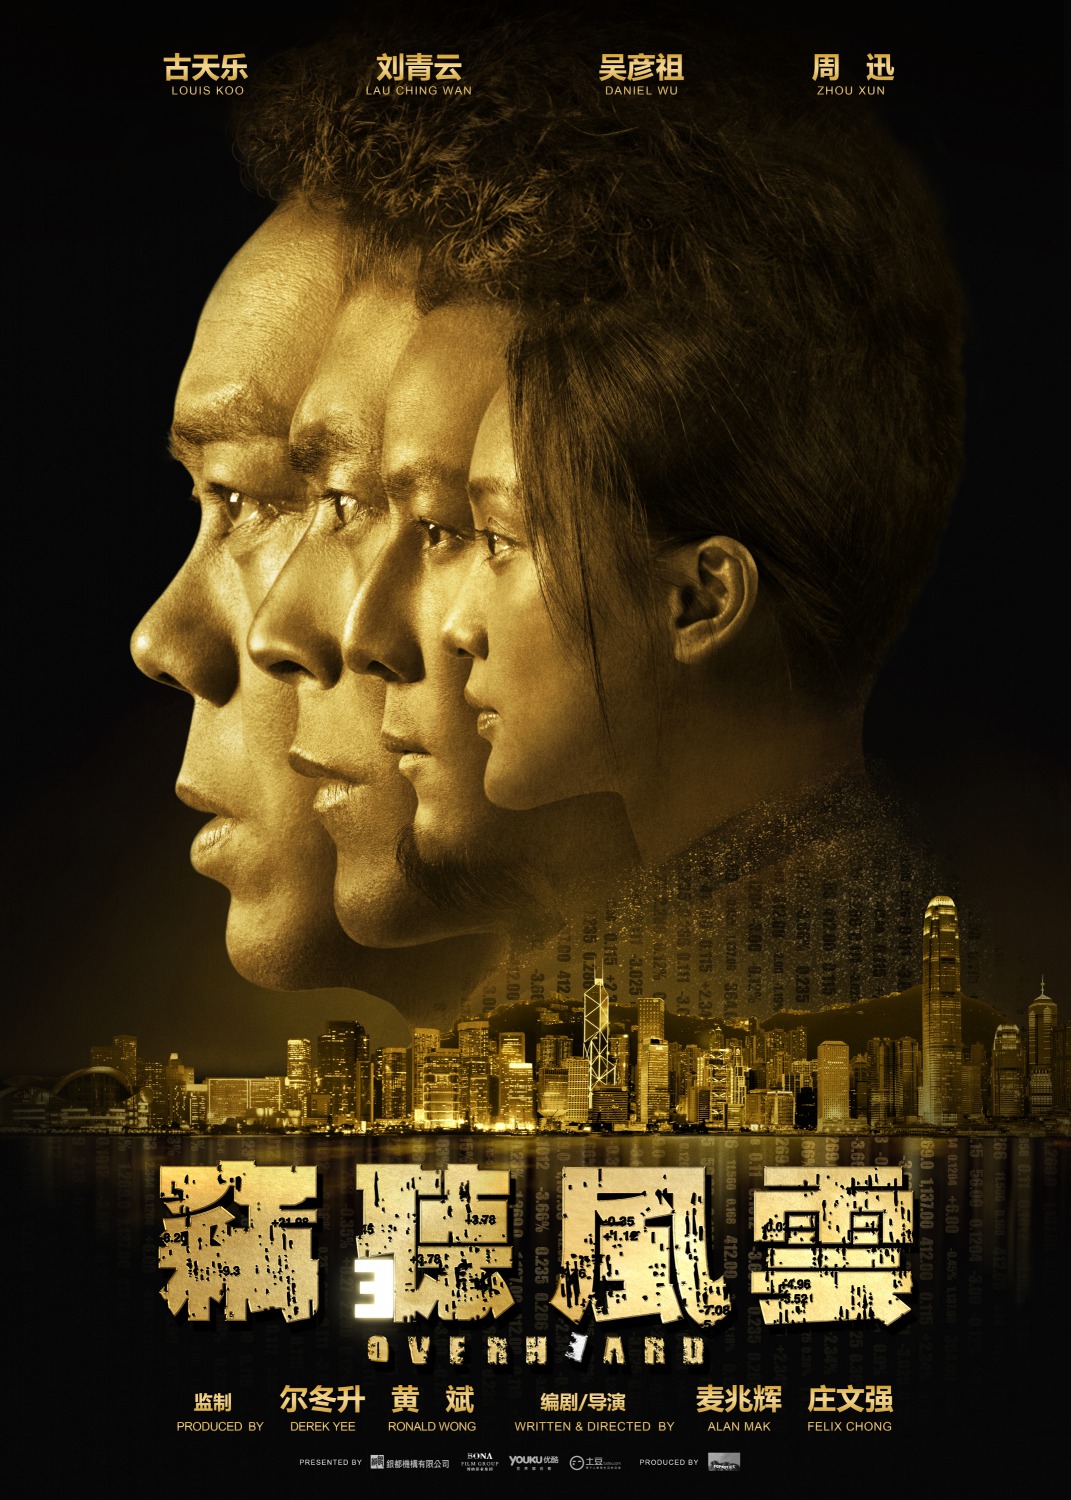 Extra Large Movie Poster Image for Sit ting fung wan 3 (#7 of 7)